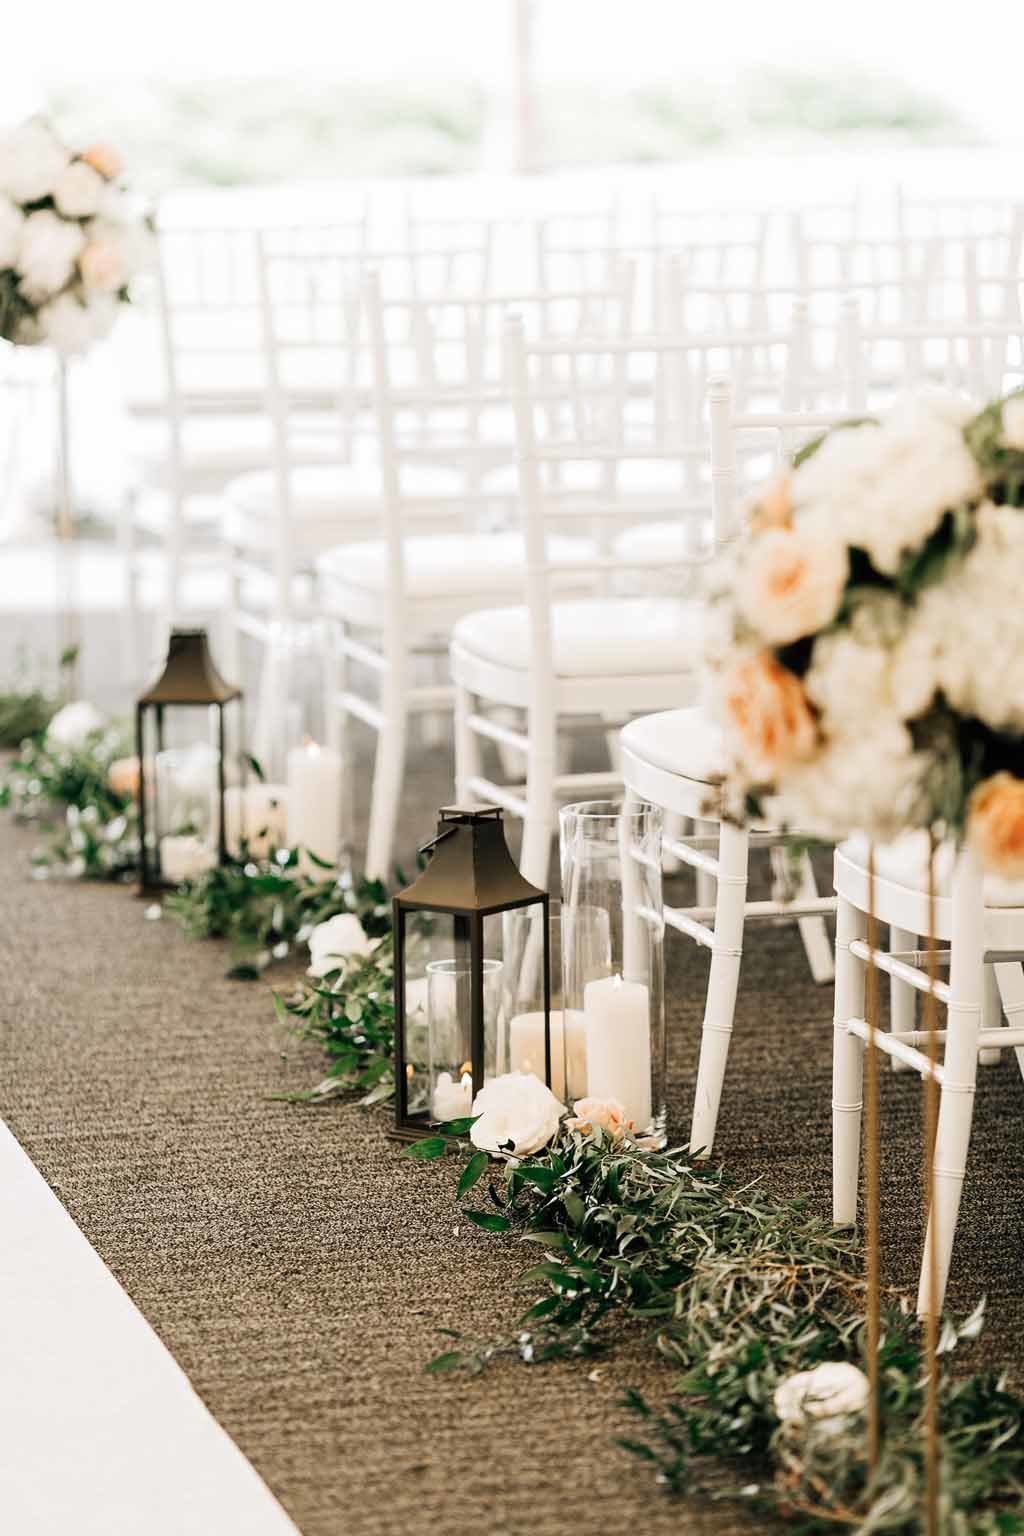 Lanterns,  pillar candles  and greenery garlands line the aisle of this tent wedding in Seattle.